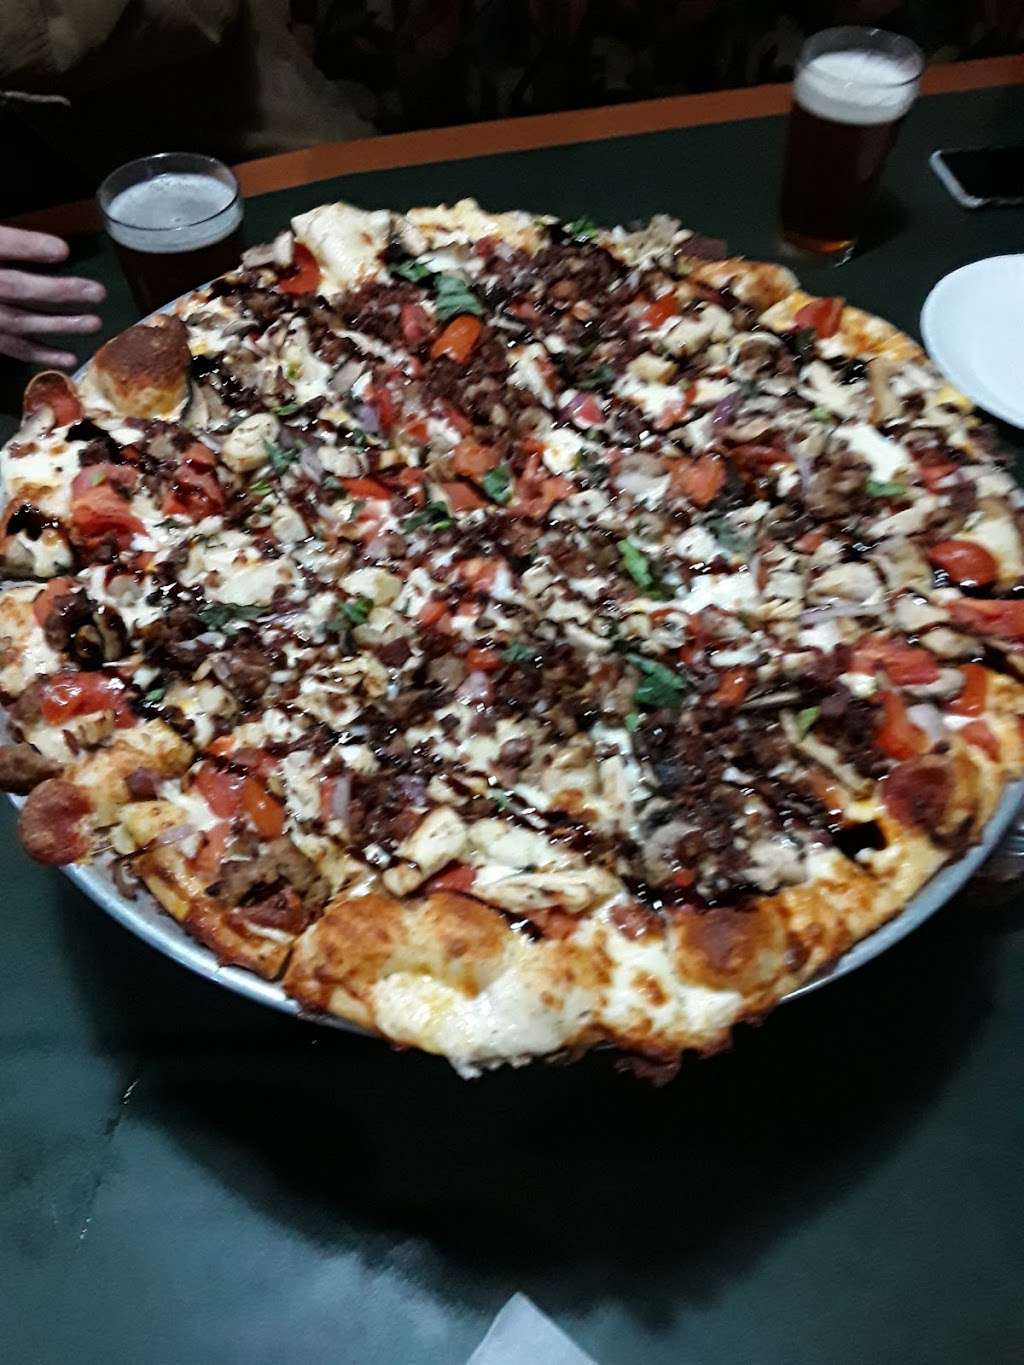 Round Table Pizza | 2651 Blanding Ave H, Alameda, CA 94501 | Phone: (510) 748-8600